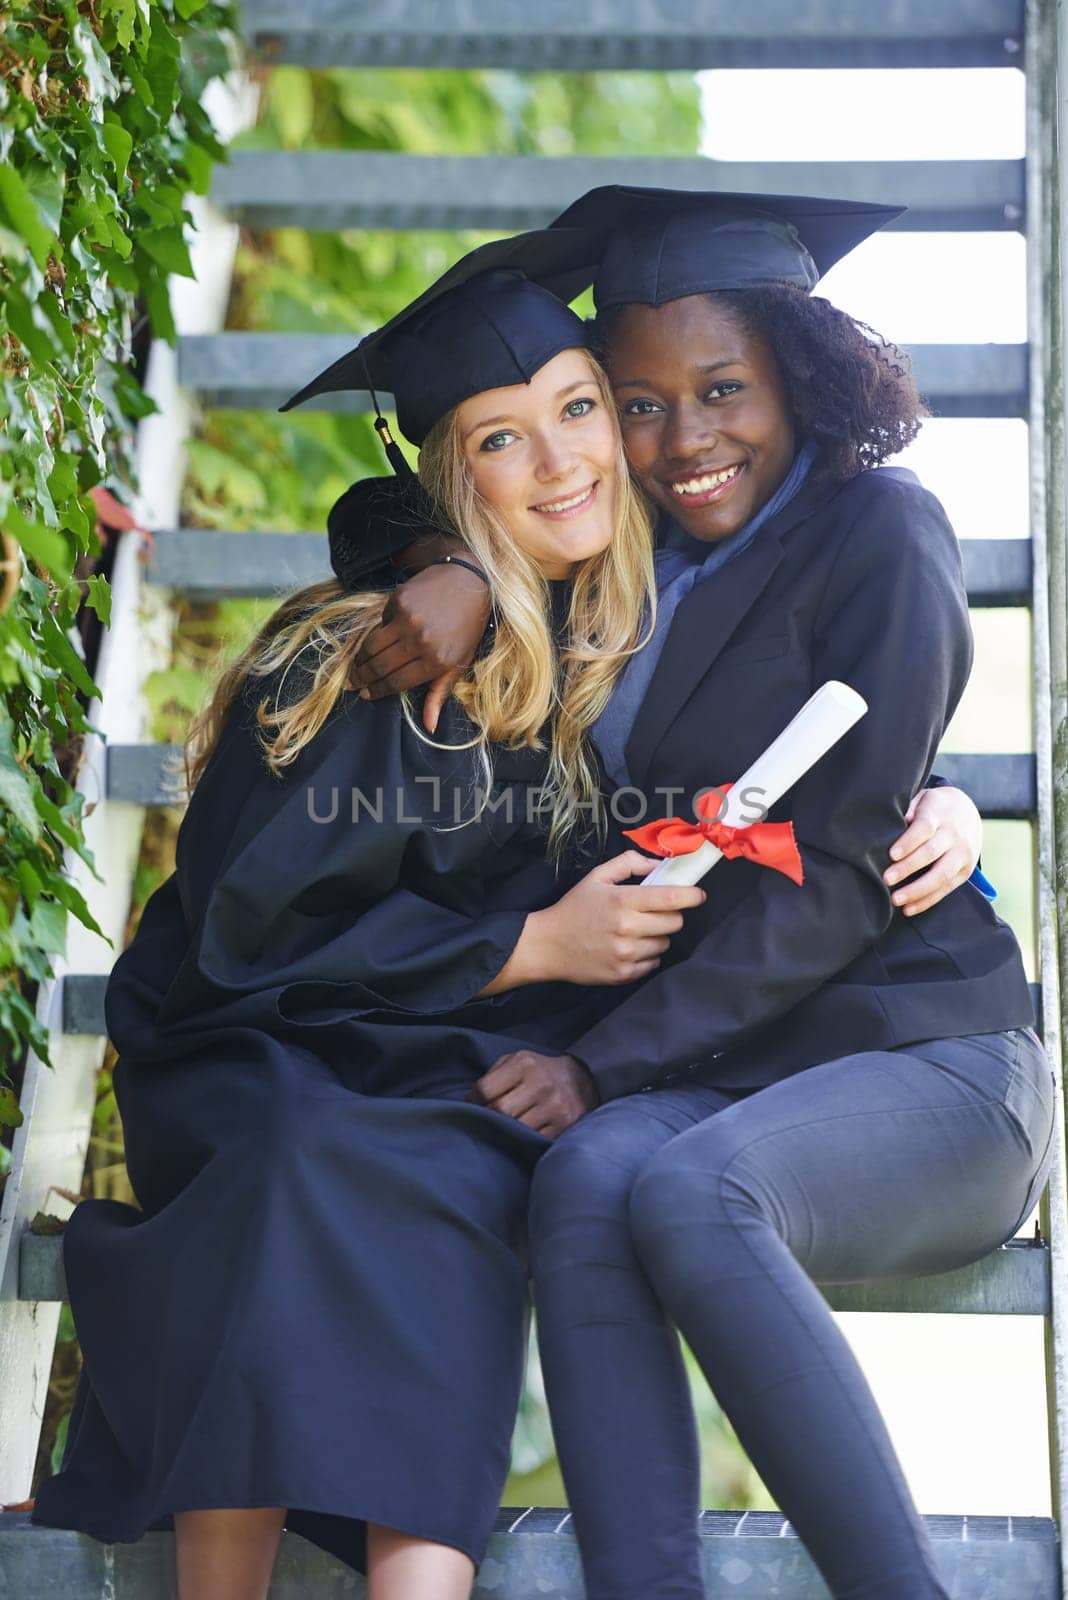 Graduation, college and women or friends hug for education achievement, success and celebration of diploma. Portrait of students in diversity with law certificate, university campus by stairs.